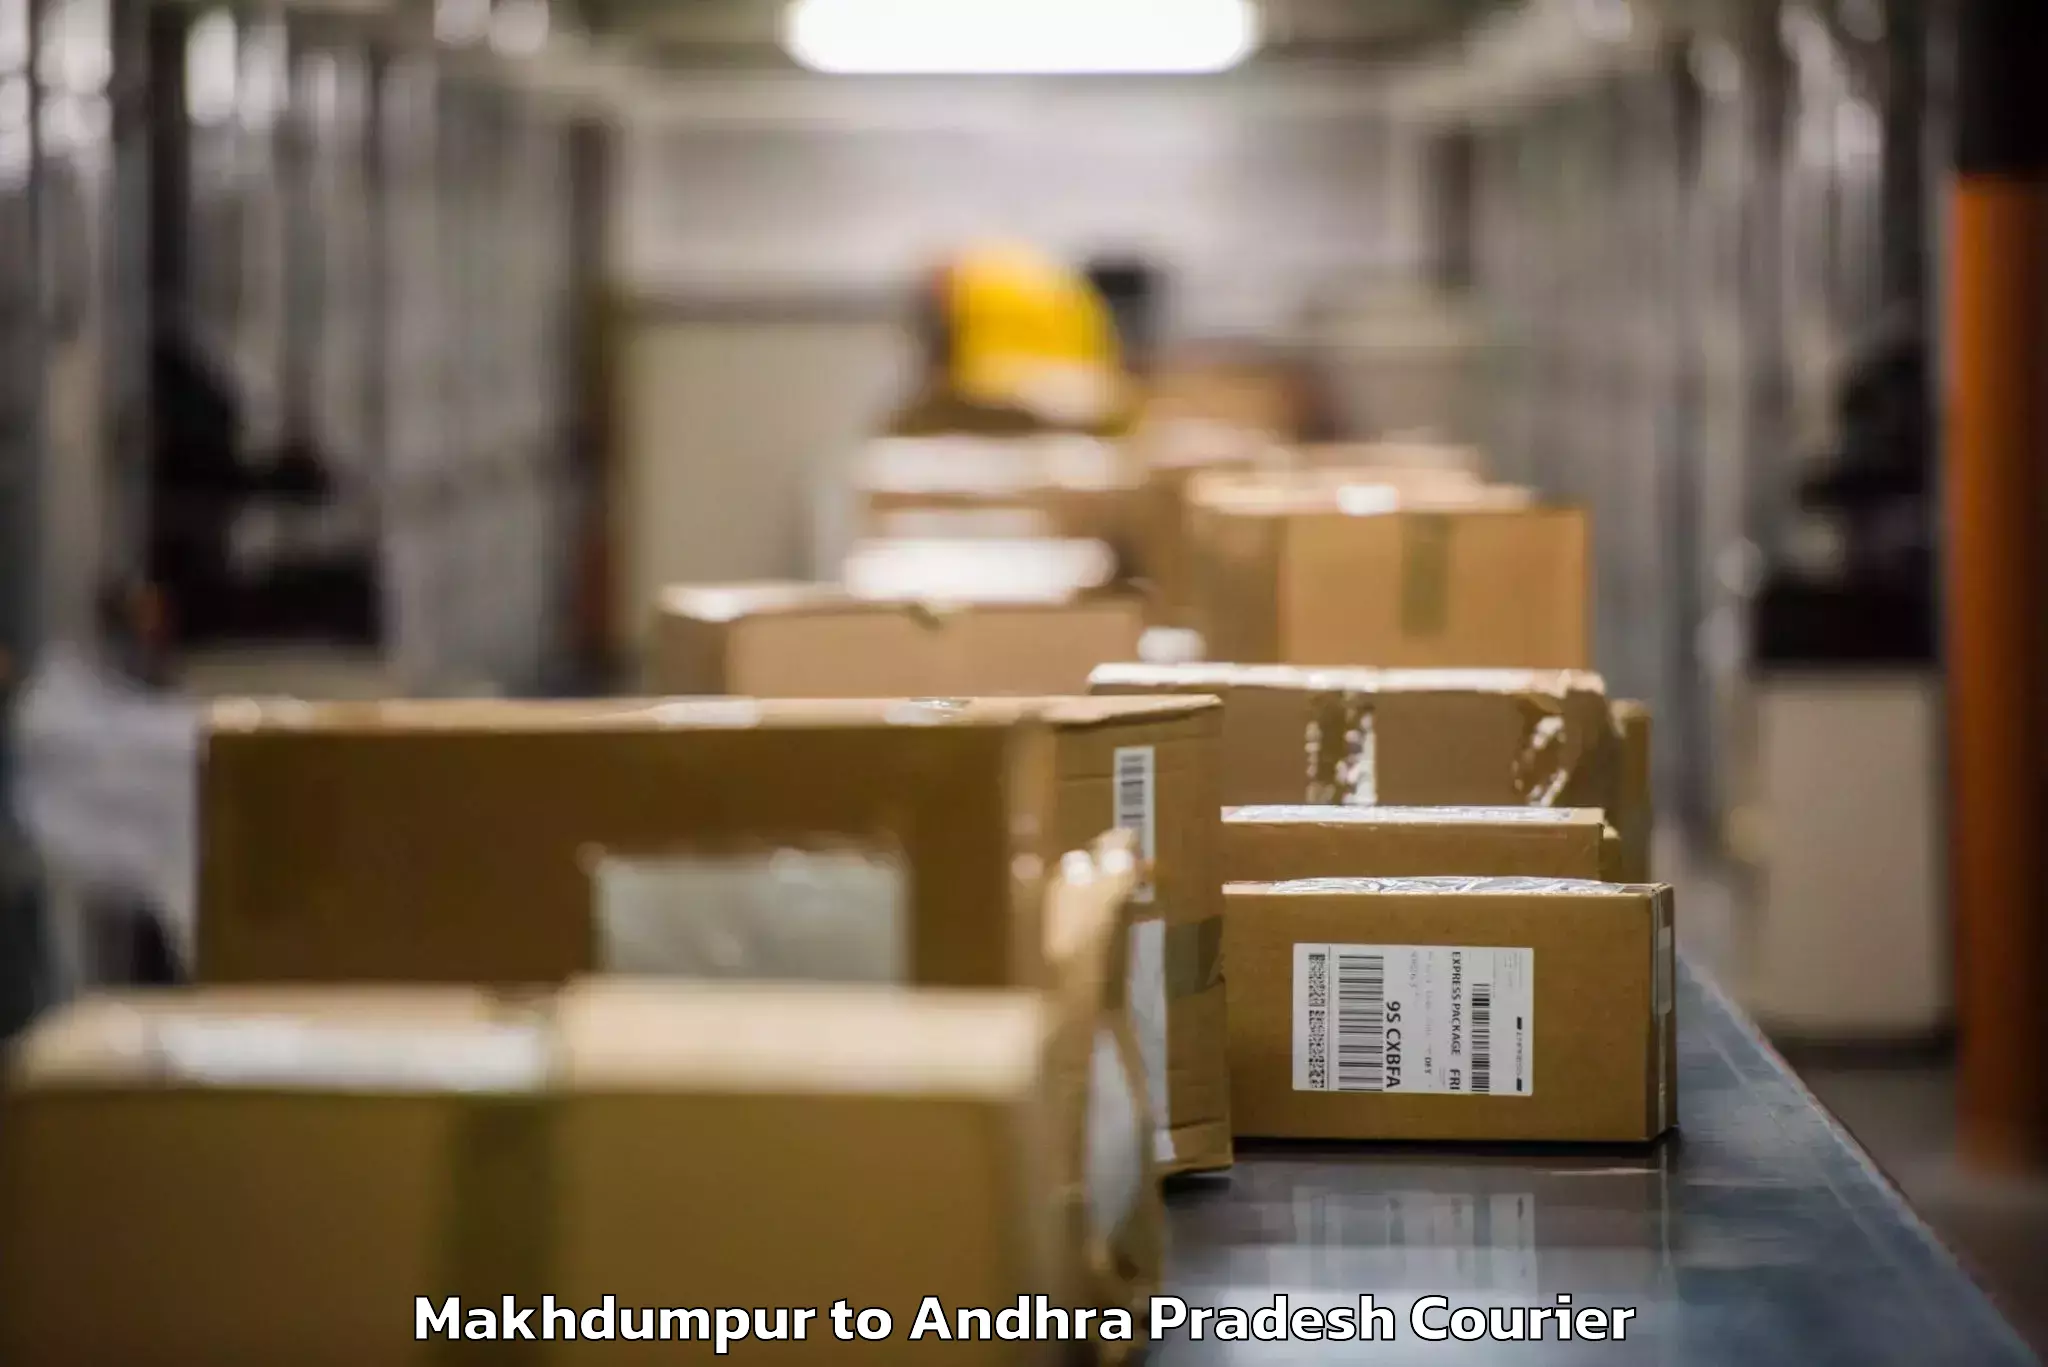 Luggage shipment specialists Makhdumpur to Kathipudi